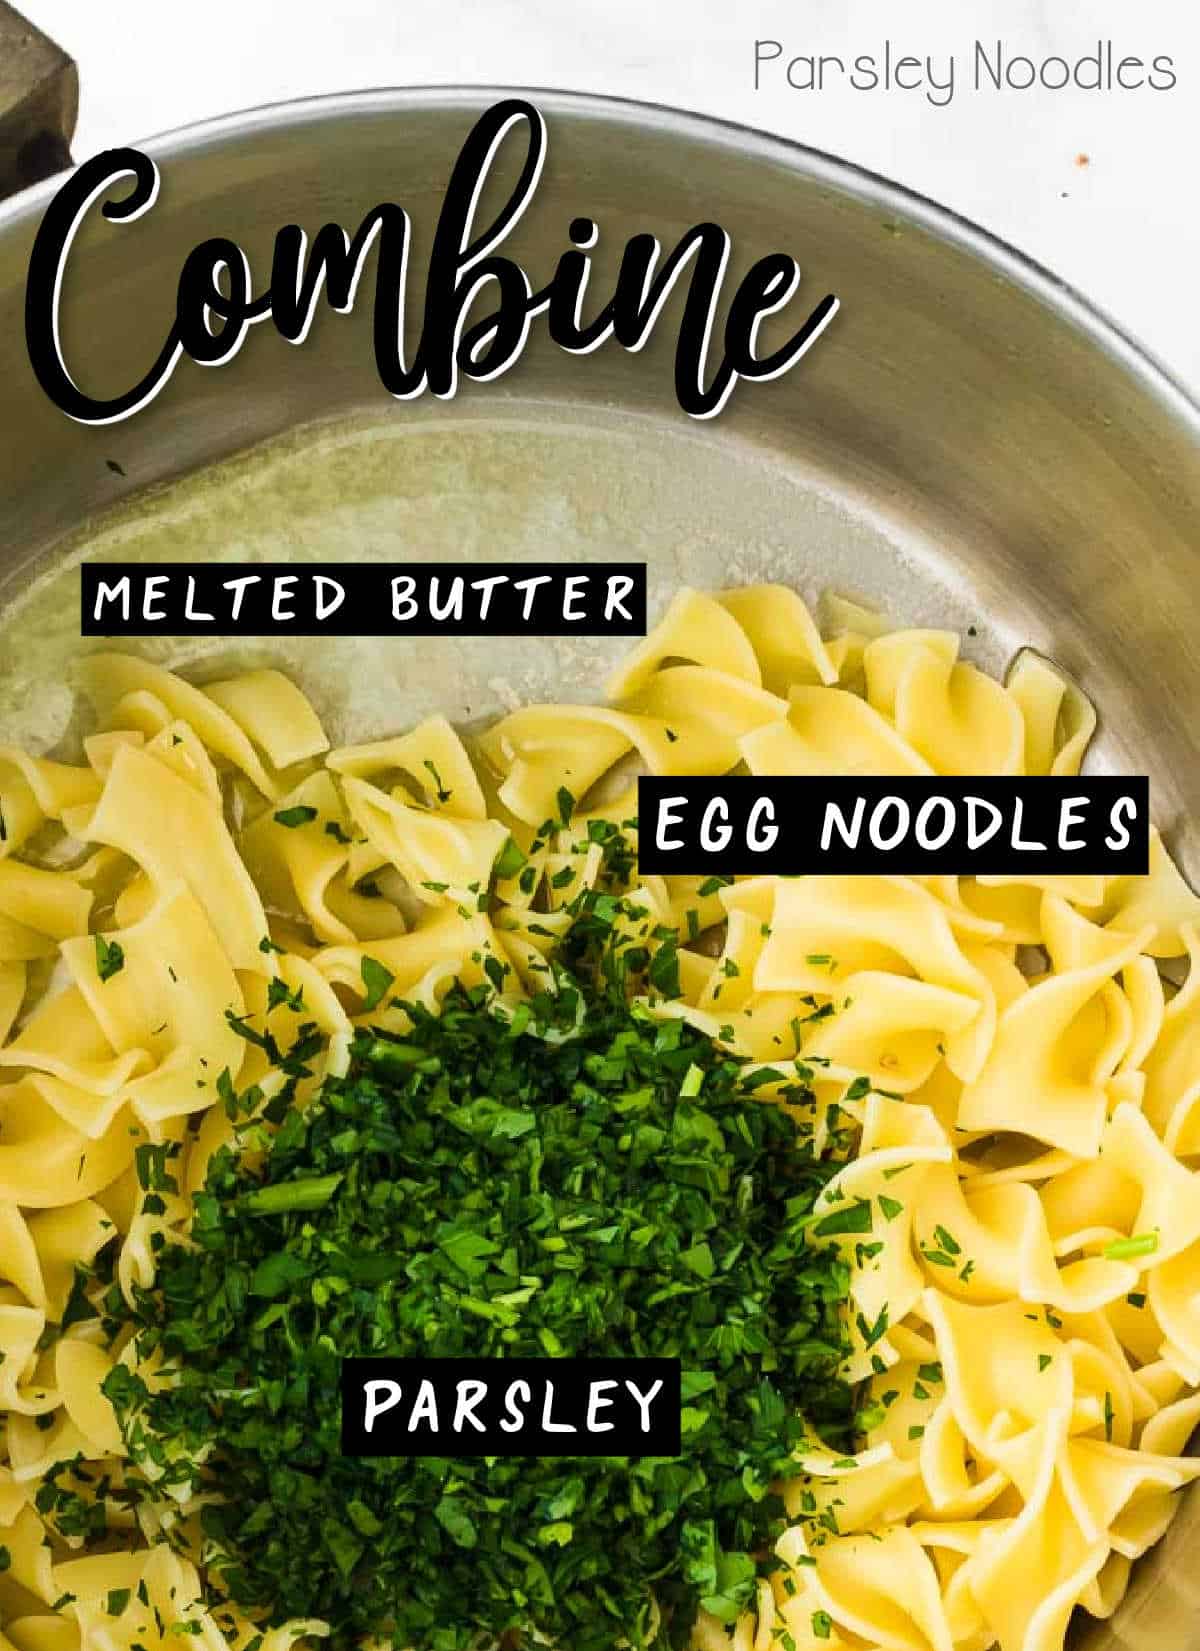 STEP: (making parsley noodles) Combine melted butter, egg noodles, and and parsley 